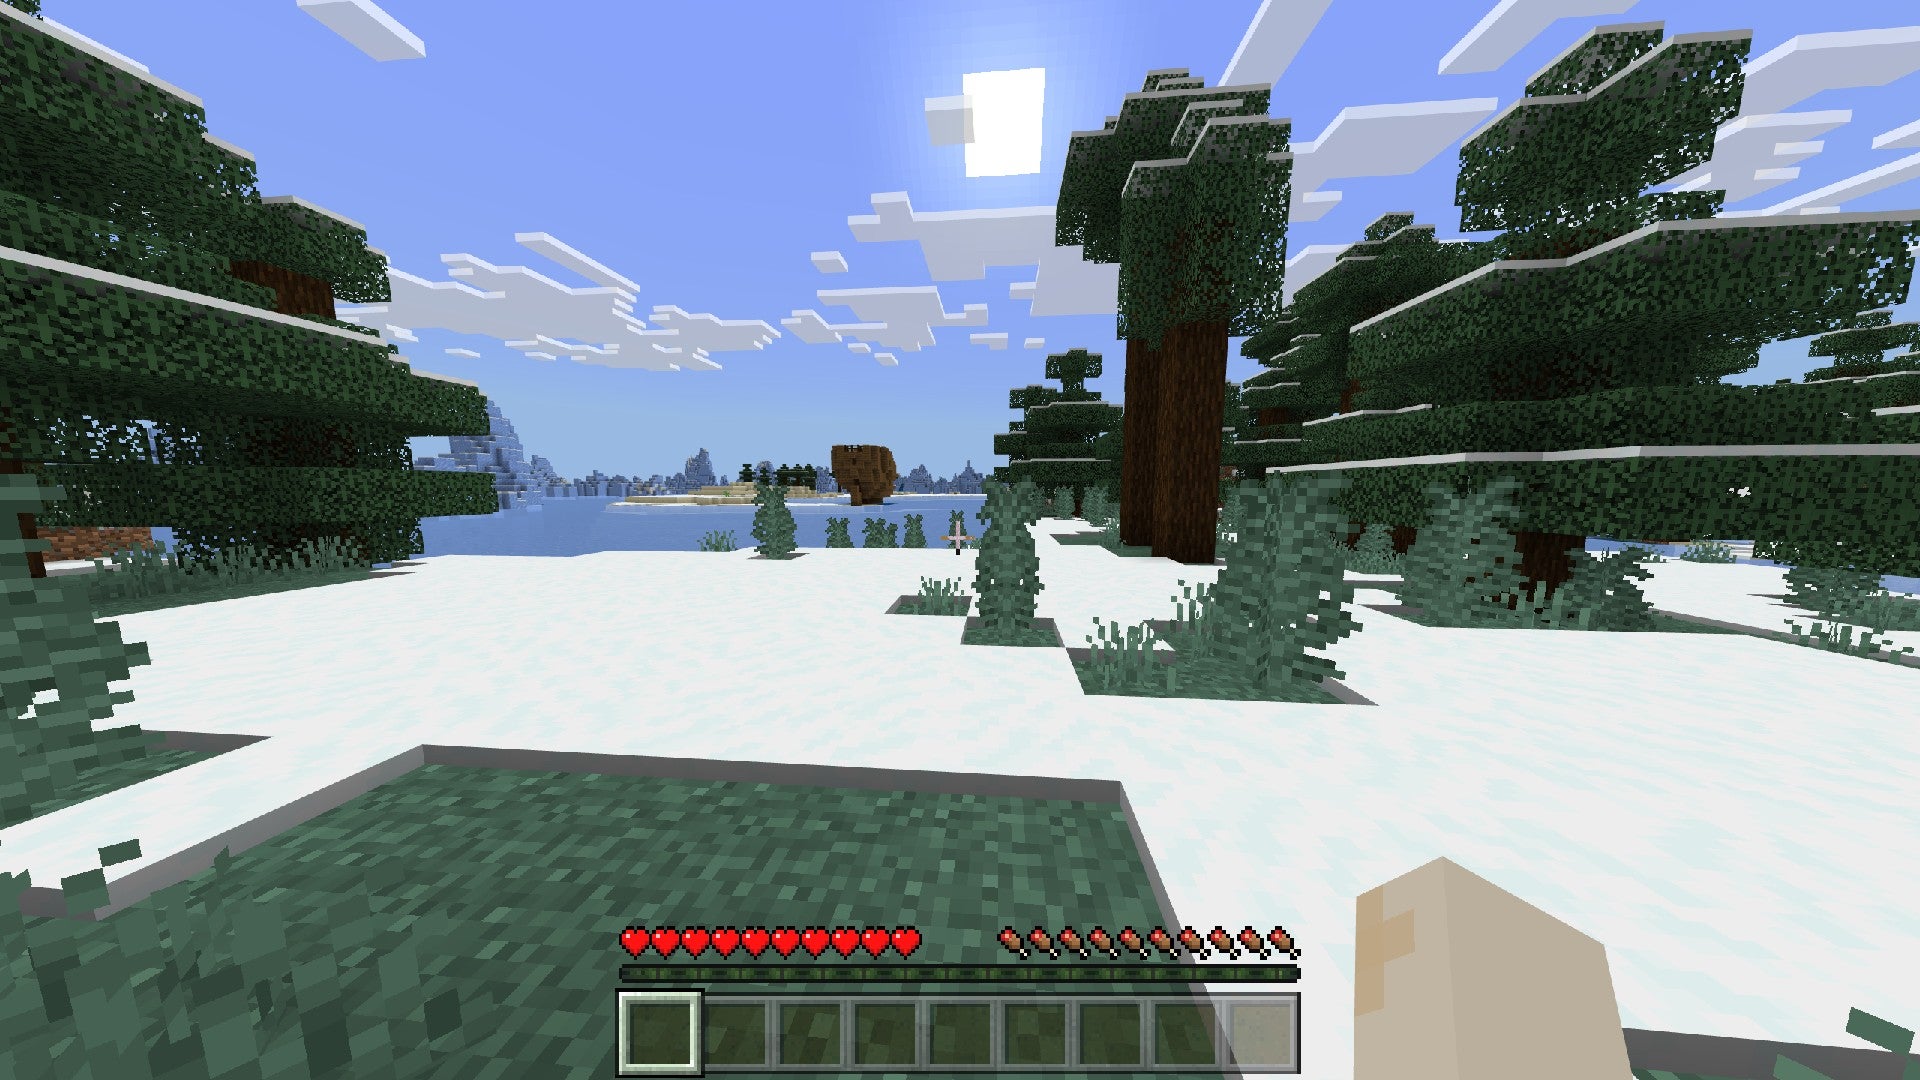 A Minecraft screenshot showing a player in a snowy biome, with a wooden structure in the lake in front.